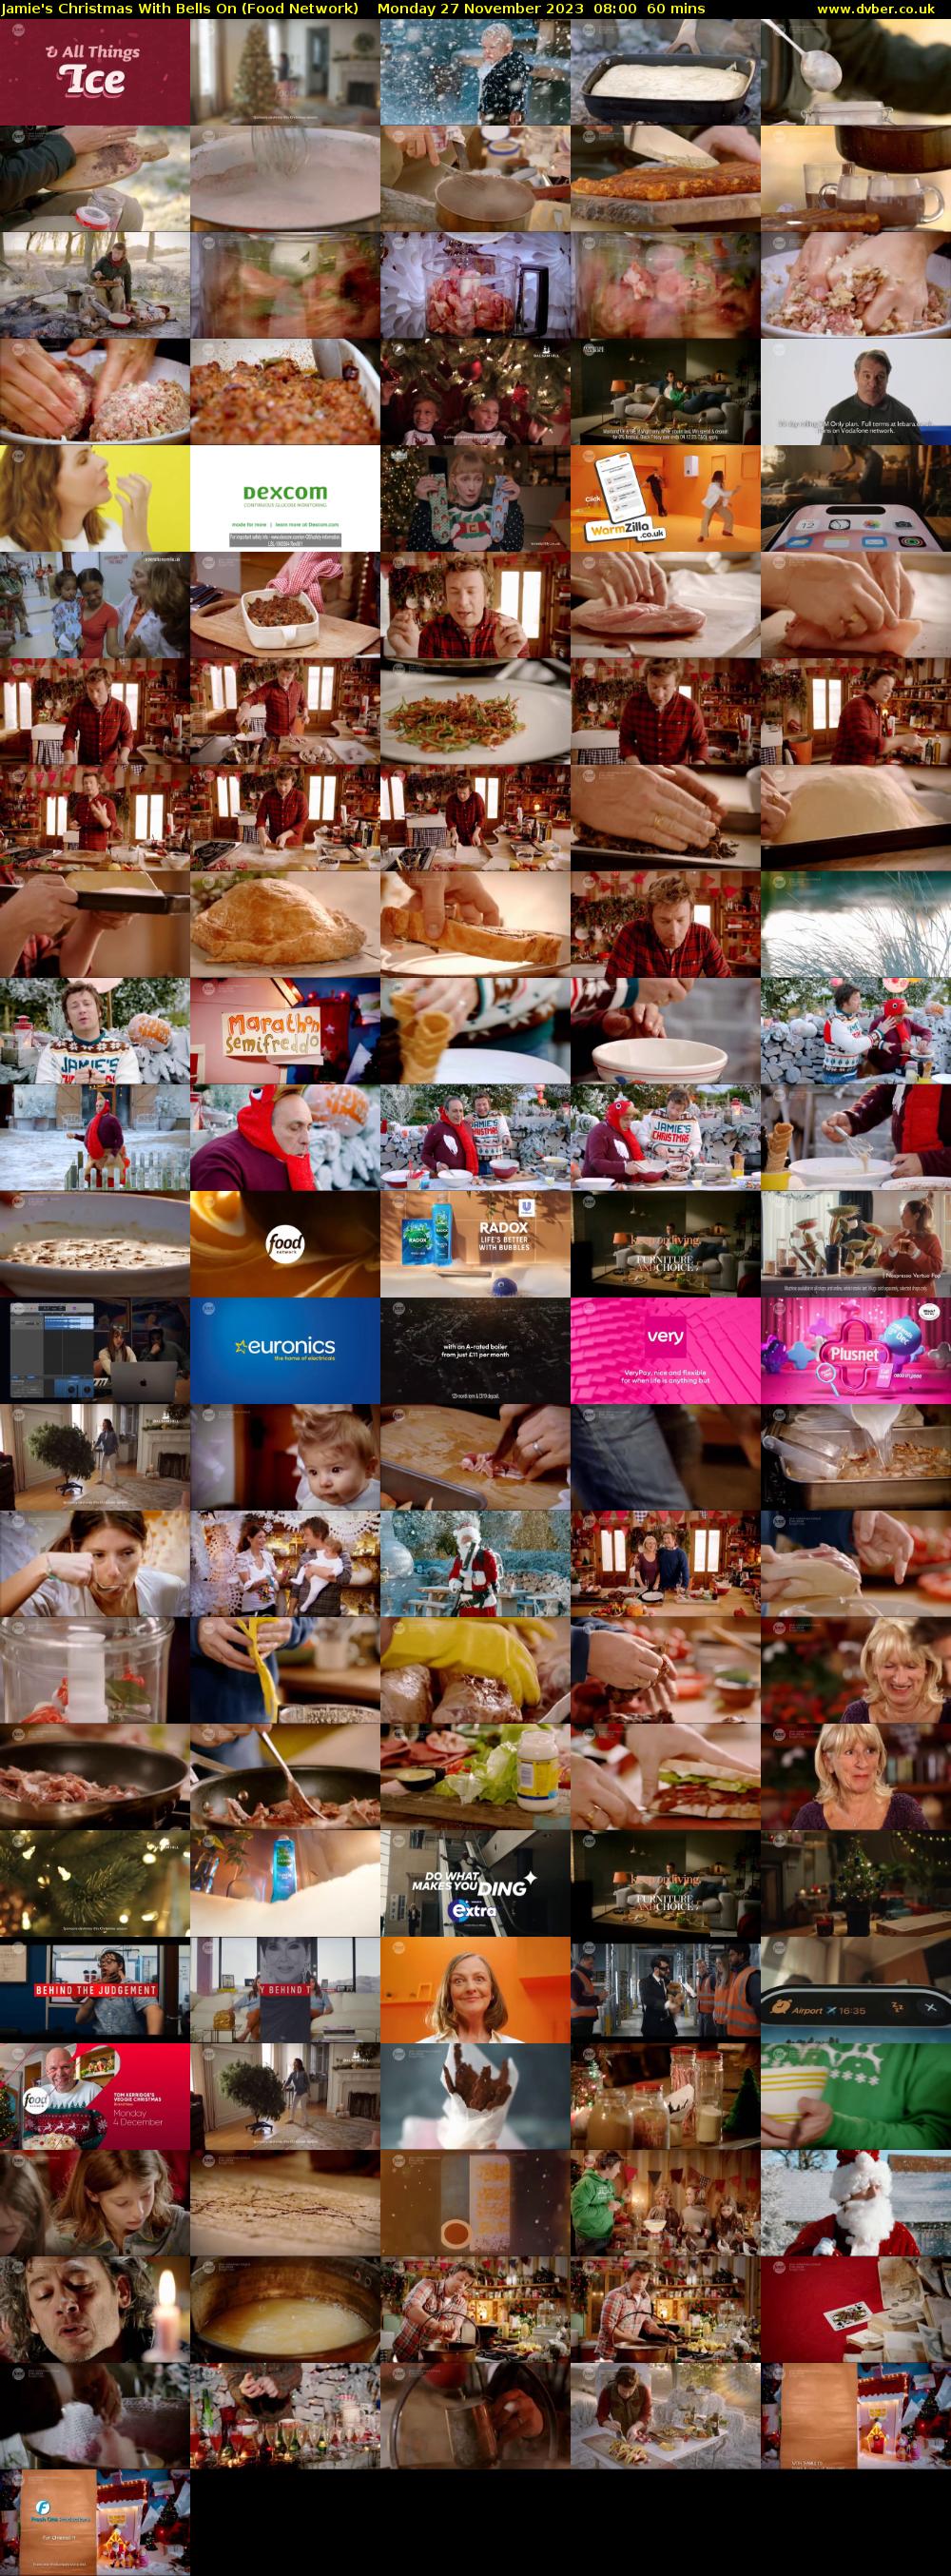 Jamie's Christmas With Bells On (Food Network) Monday 27 November 2023 08:00 - 09:00